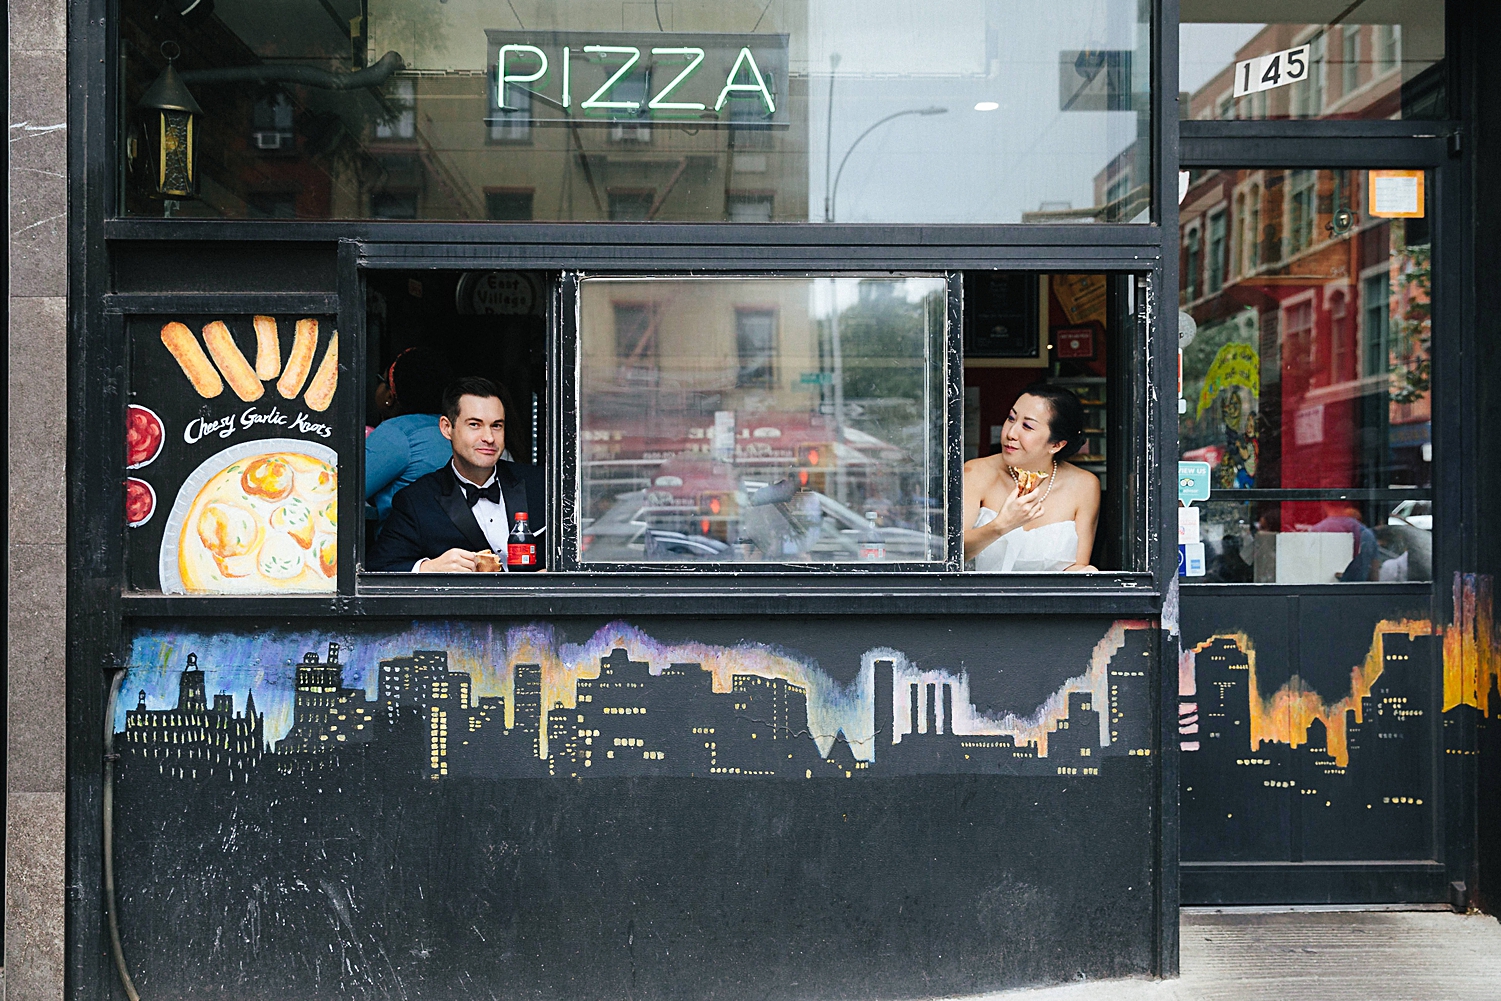 bride and groom eating pizza in new york city pizzeria windows from street